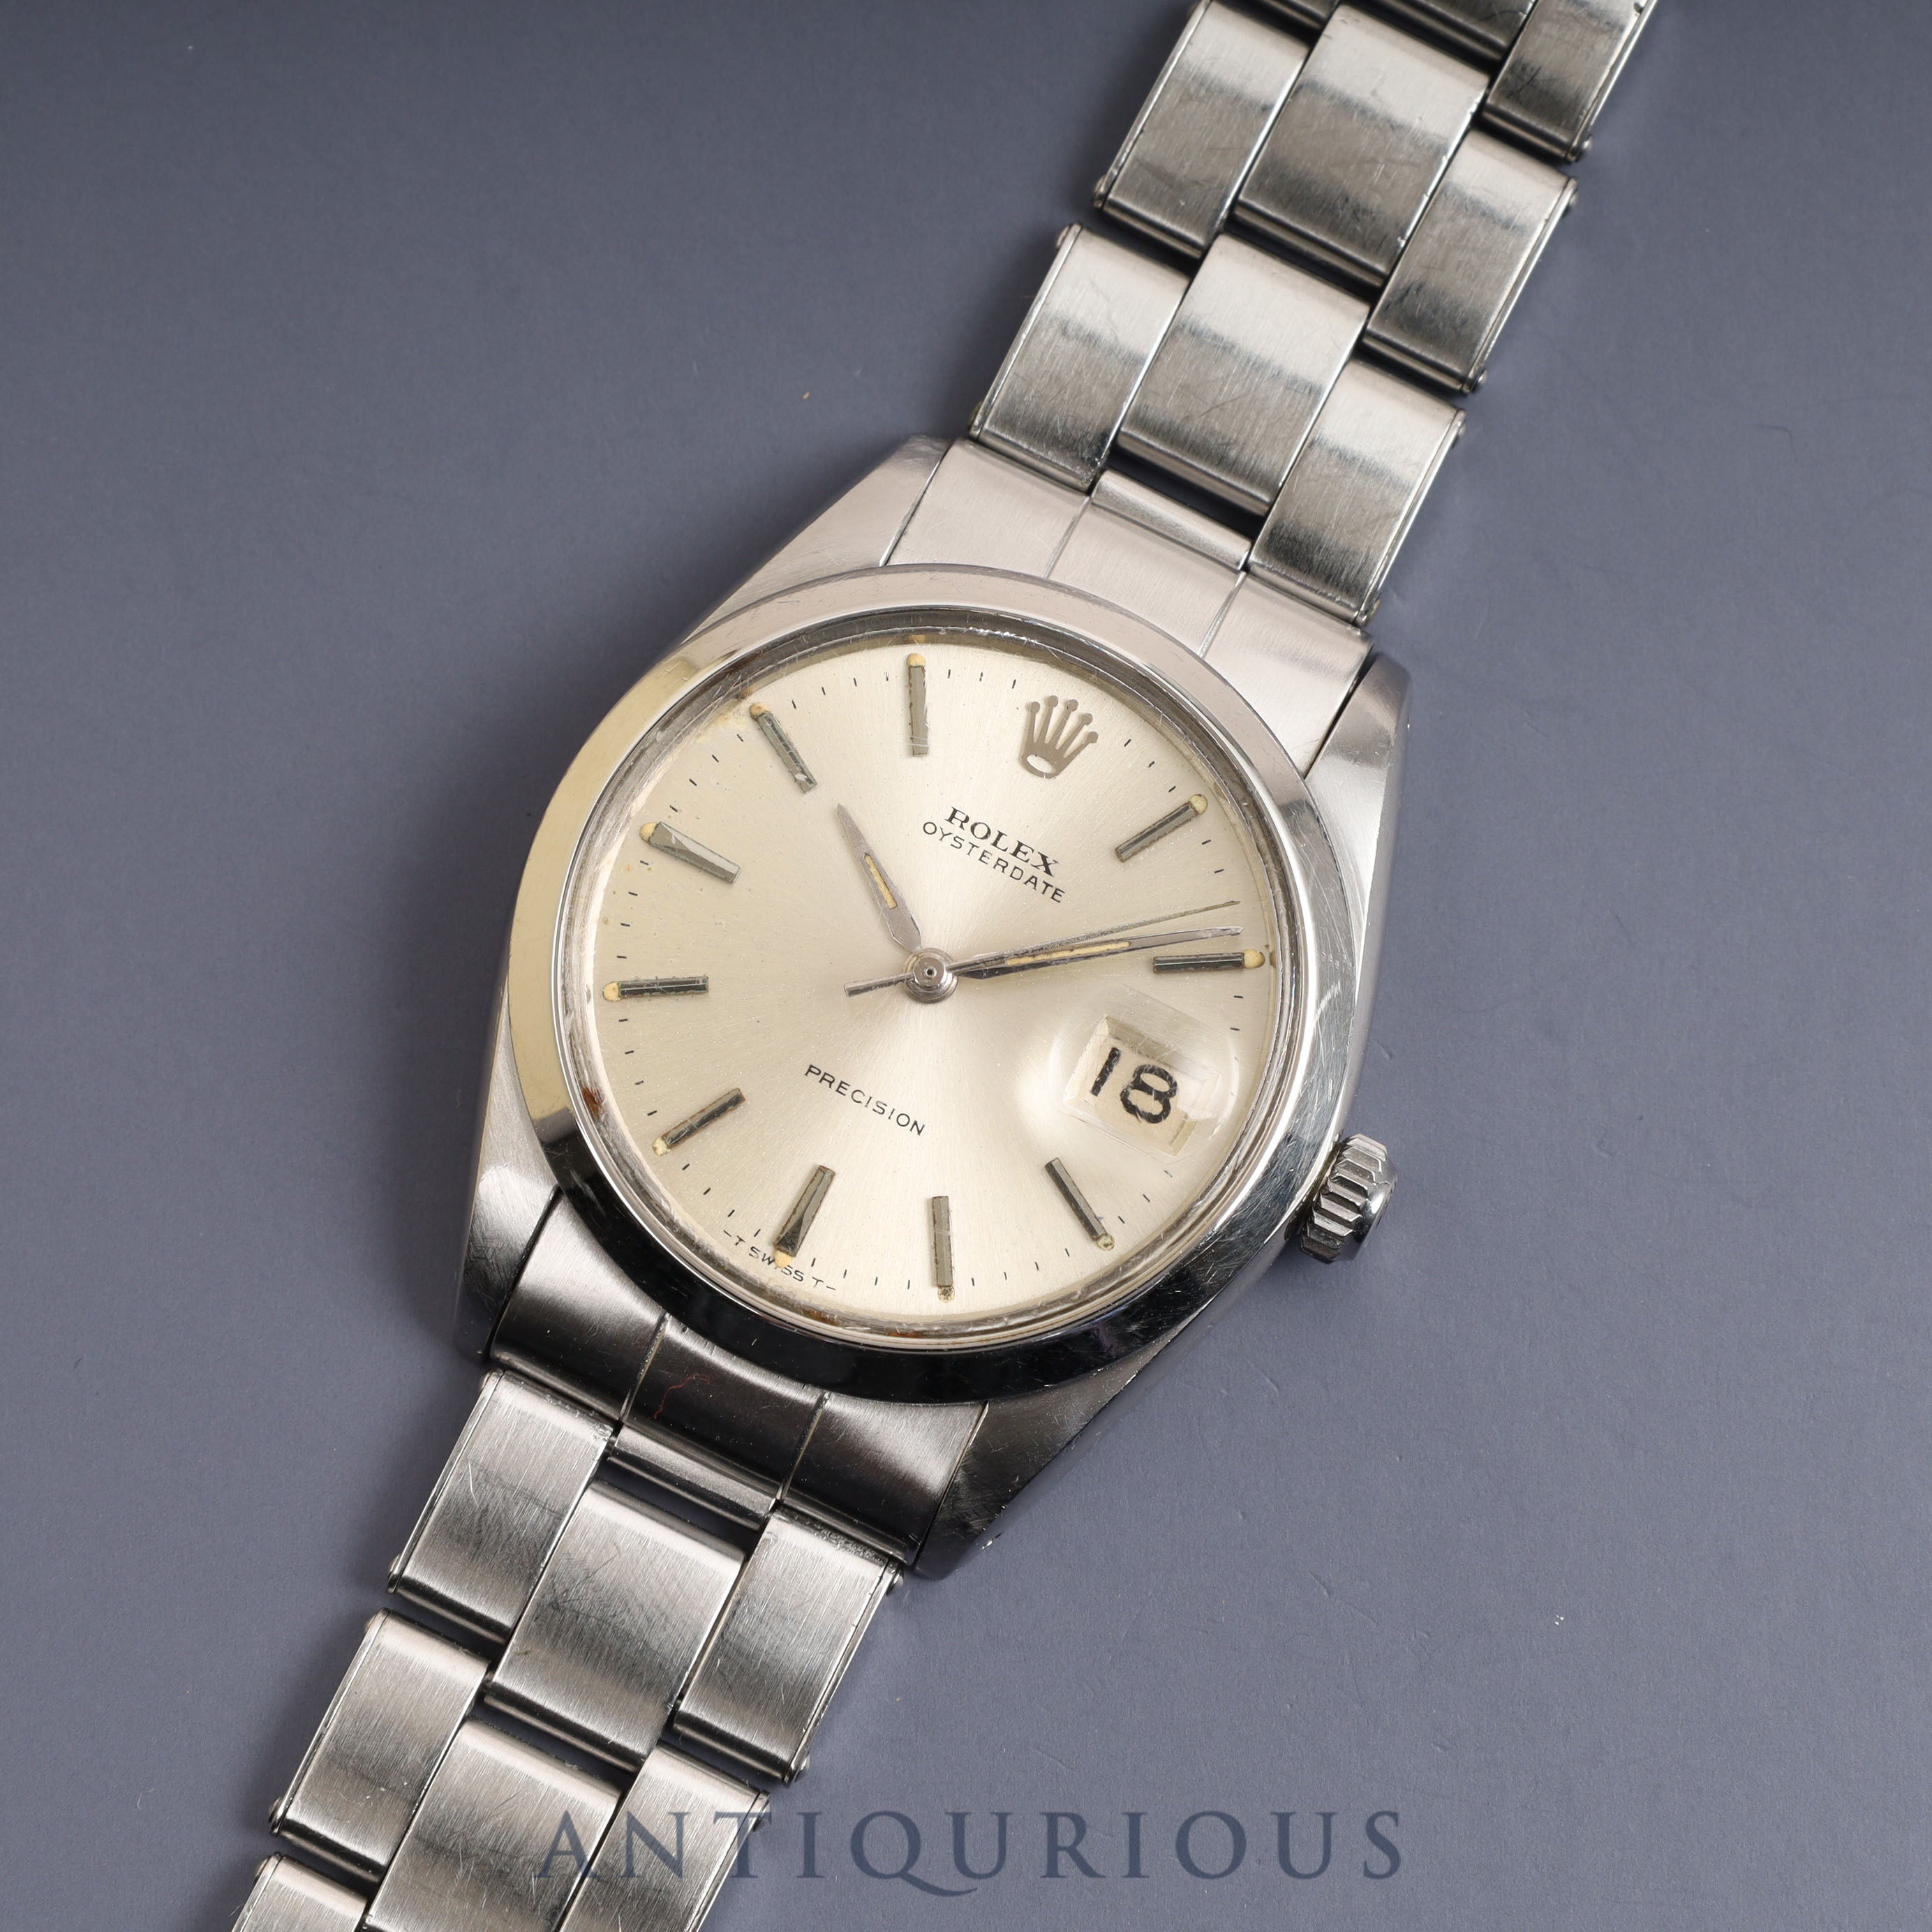 ROLEX OYSTER DATE PRECISION 6694 with warranty